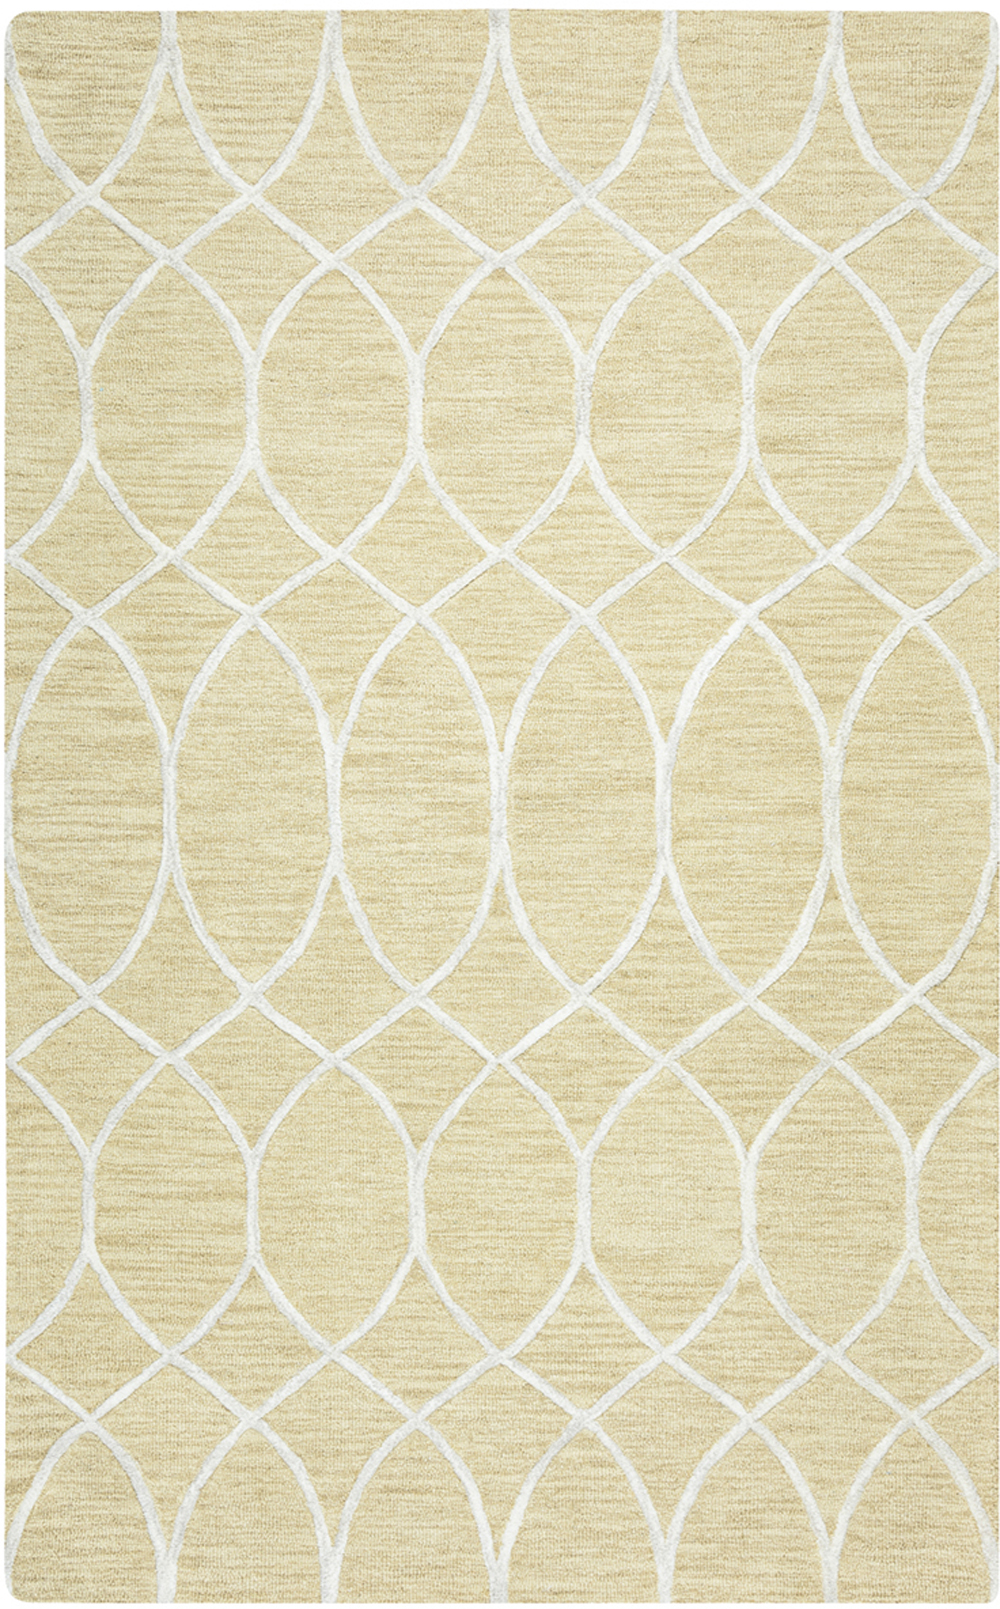 Rizzy Home Caterine CE9488 beige Rug